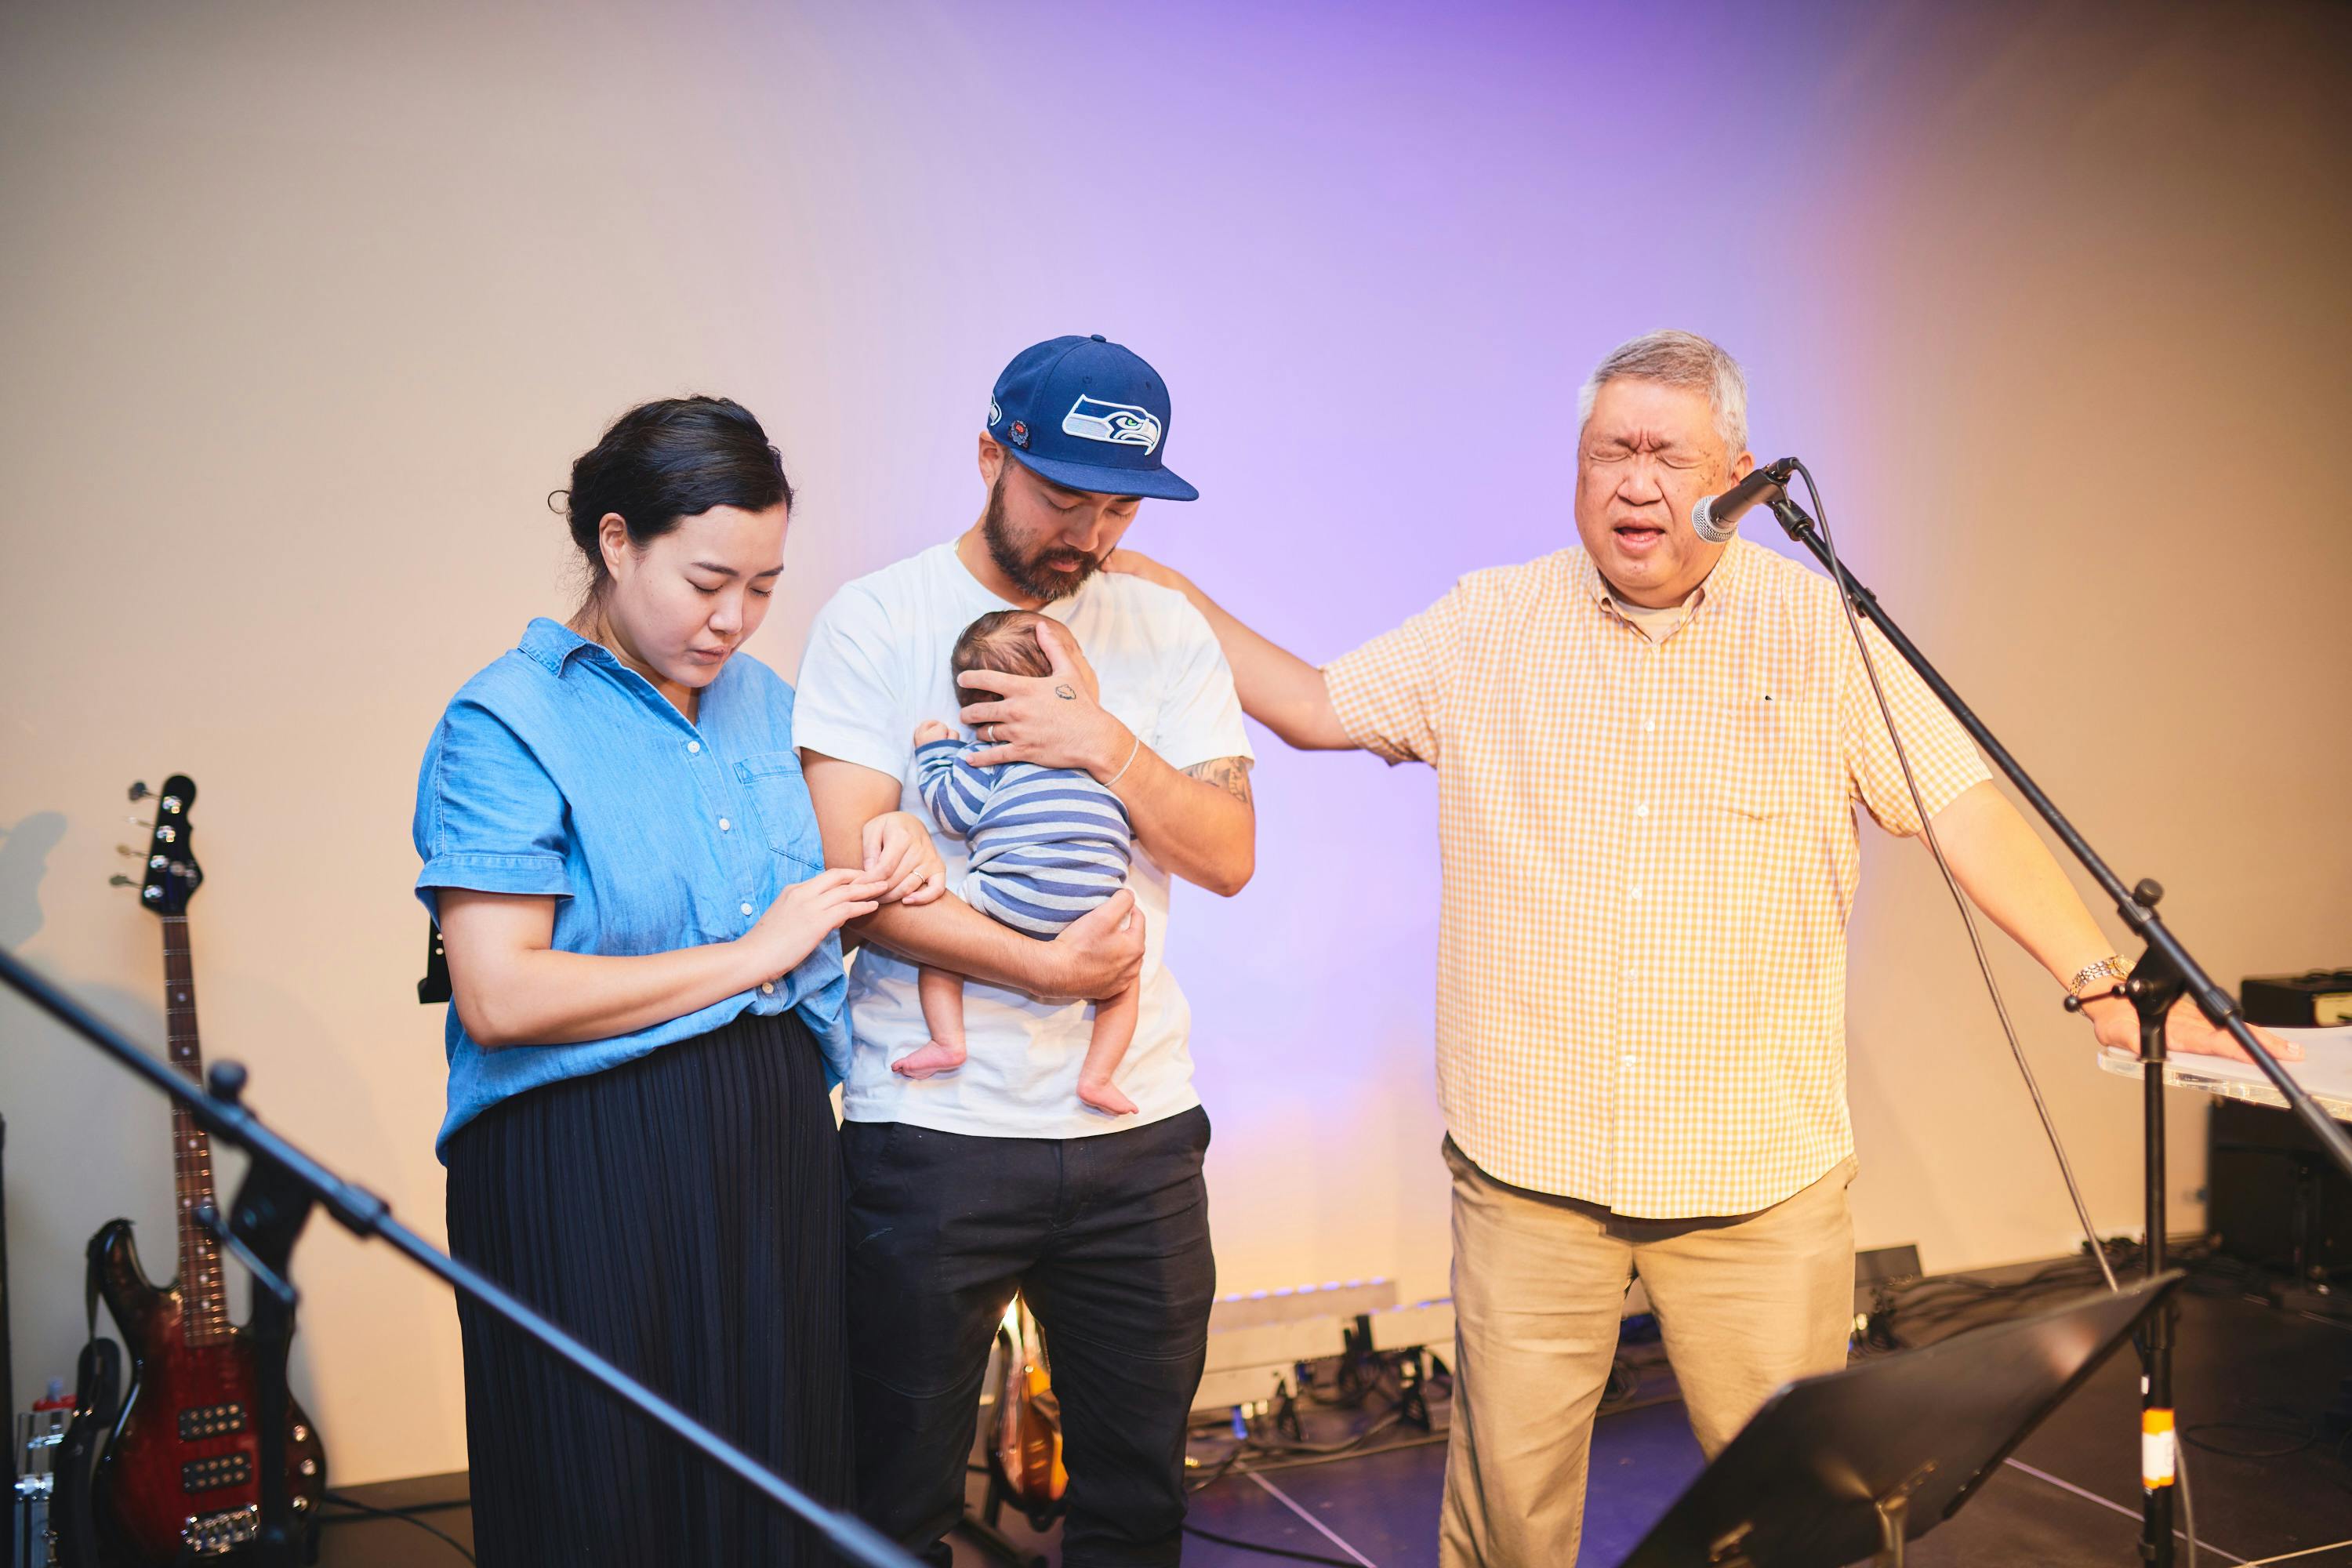 pastor praying with wife, husband and child